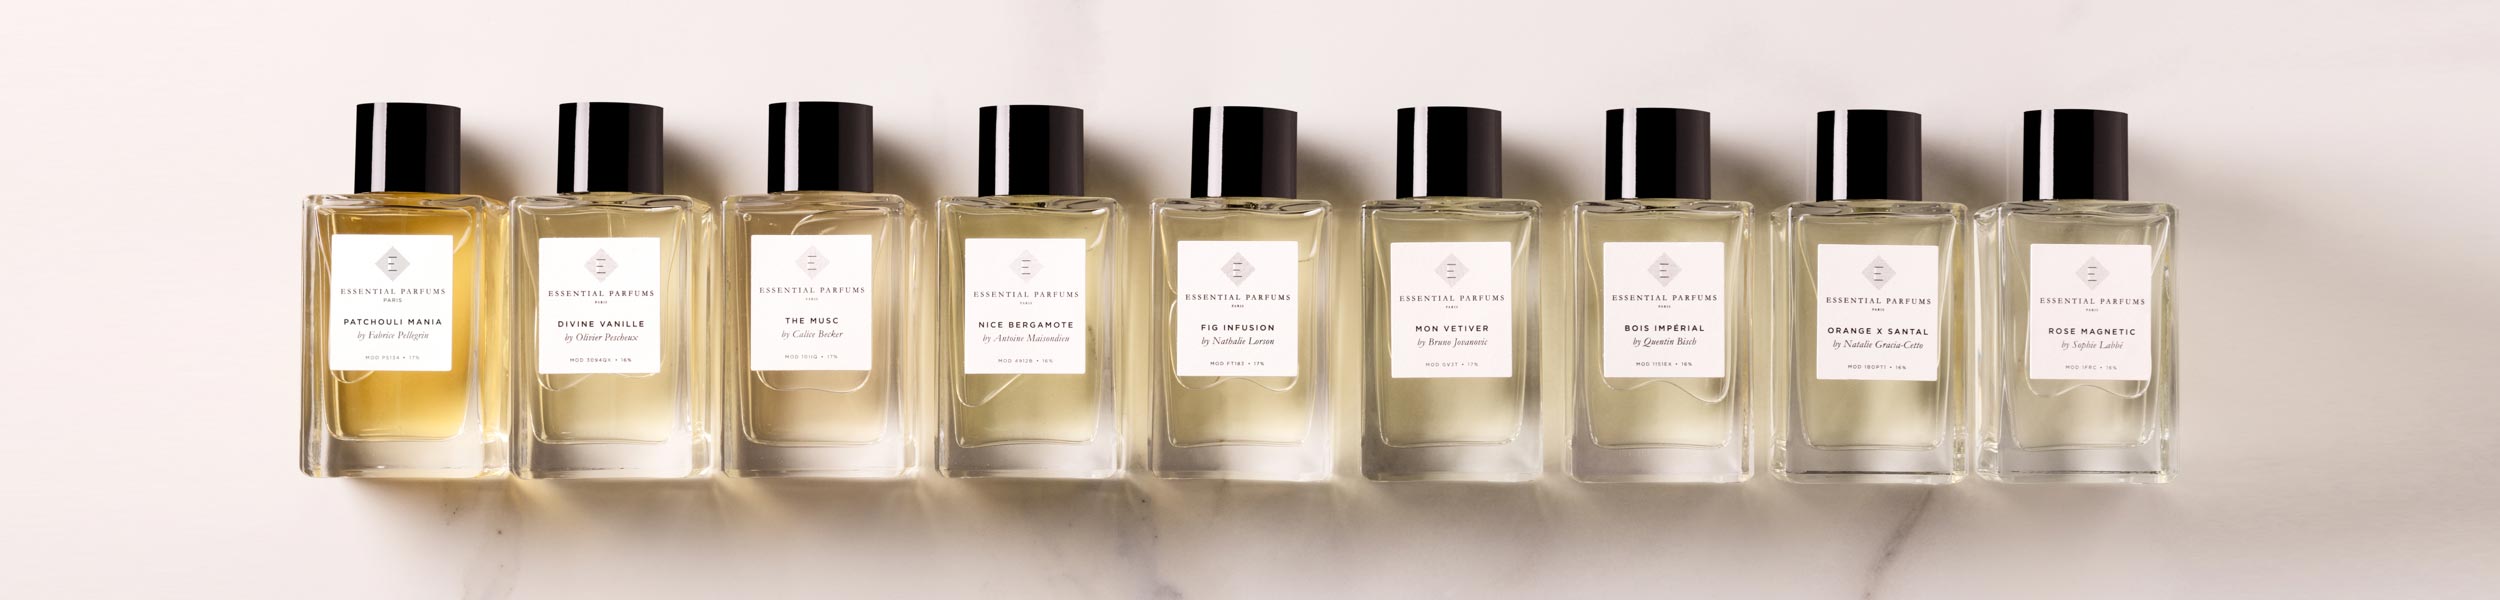 Essential Parfums collection of natural and sustainable fragrances